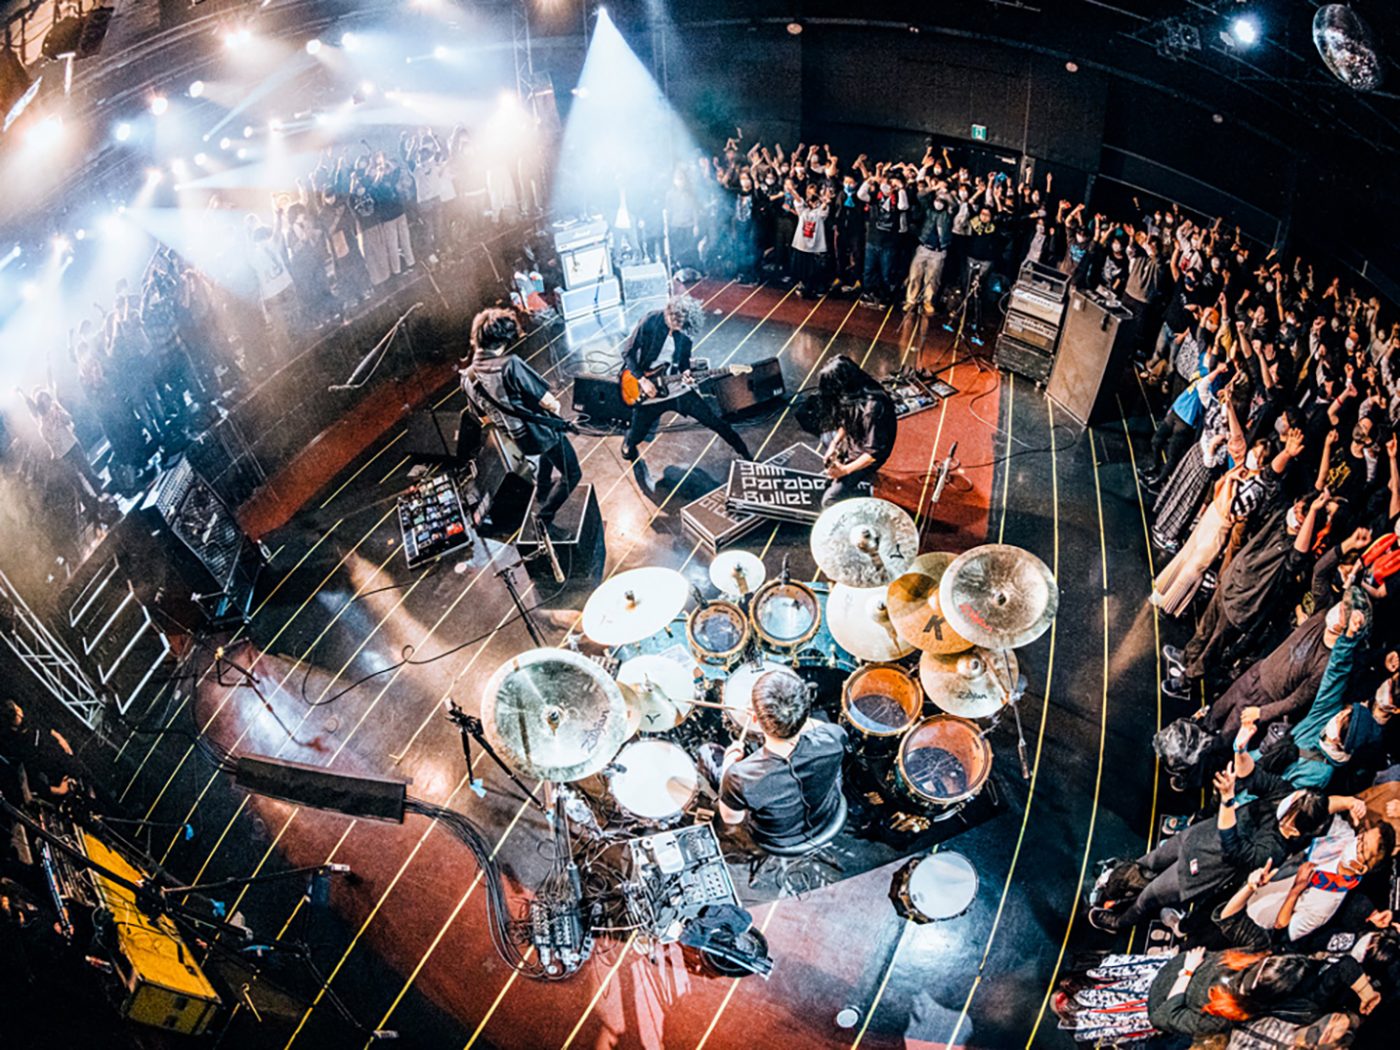 9mm Parabellum Bullet、新曲「One More Time」の配信リリースが決定 - 画像一覧（2/2）